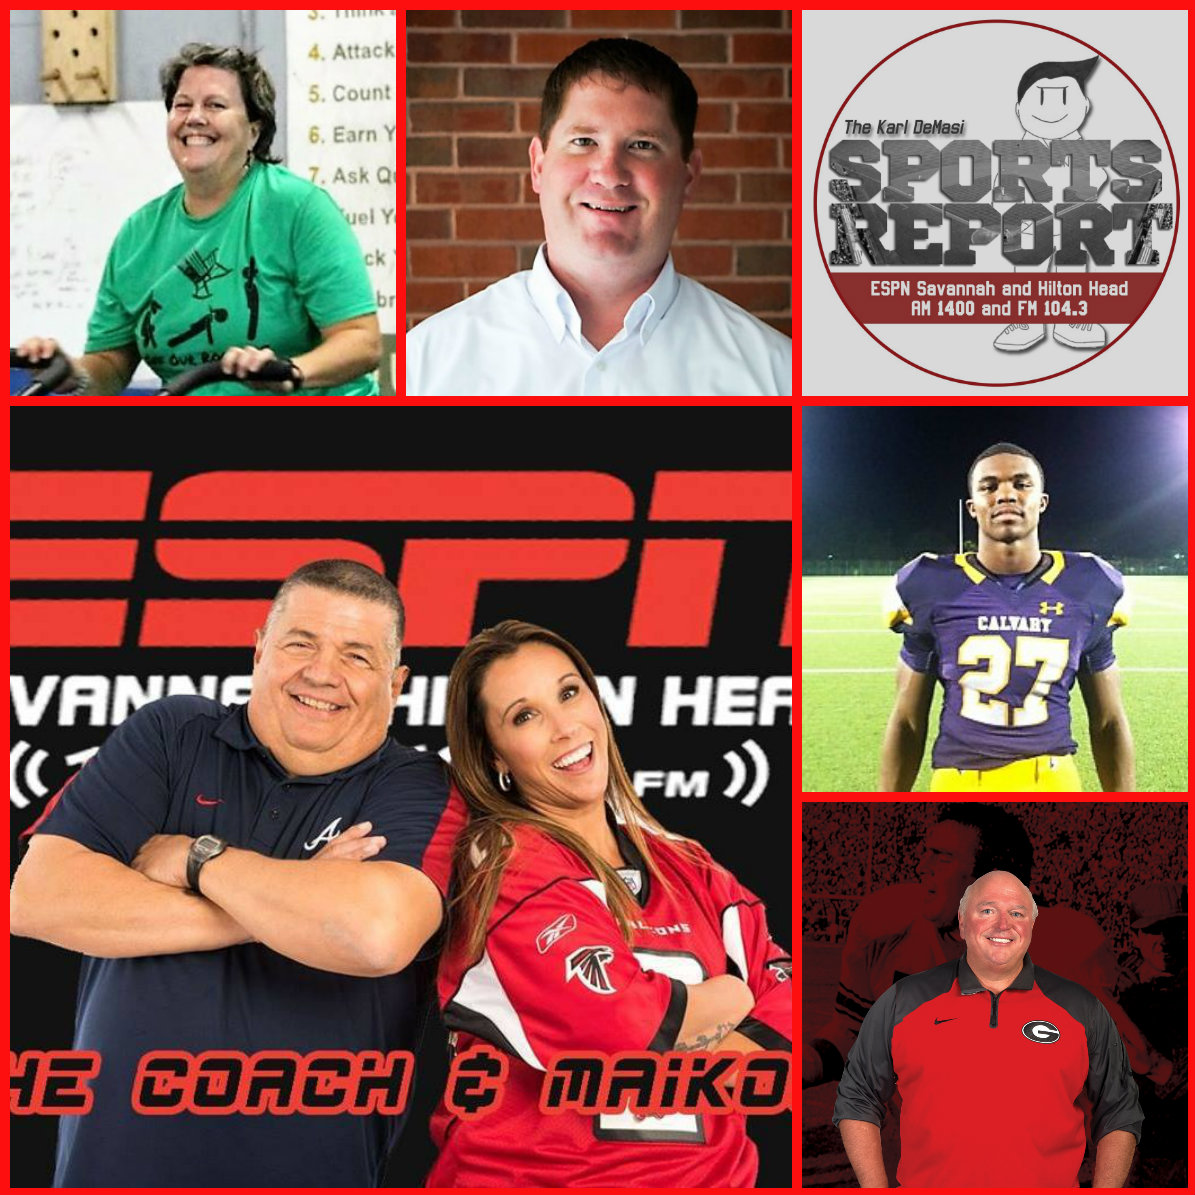 The Karl DeMasi Sports Report 11.11.17 - The Coach and Maikos